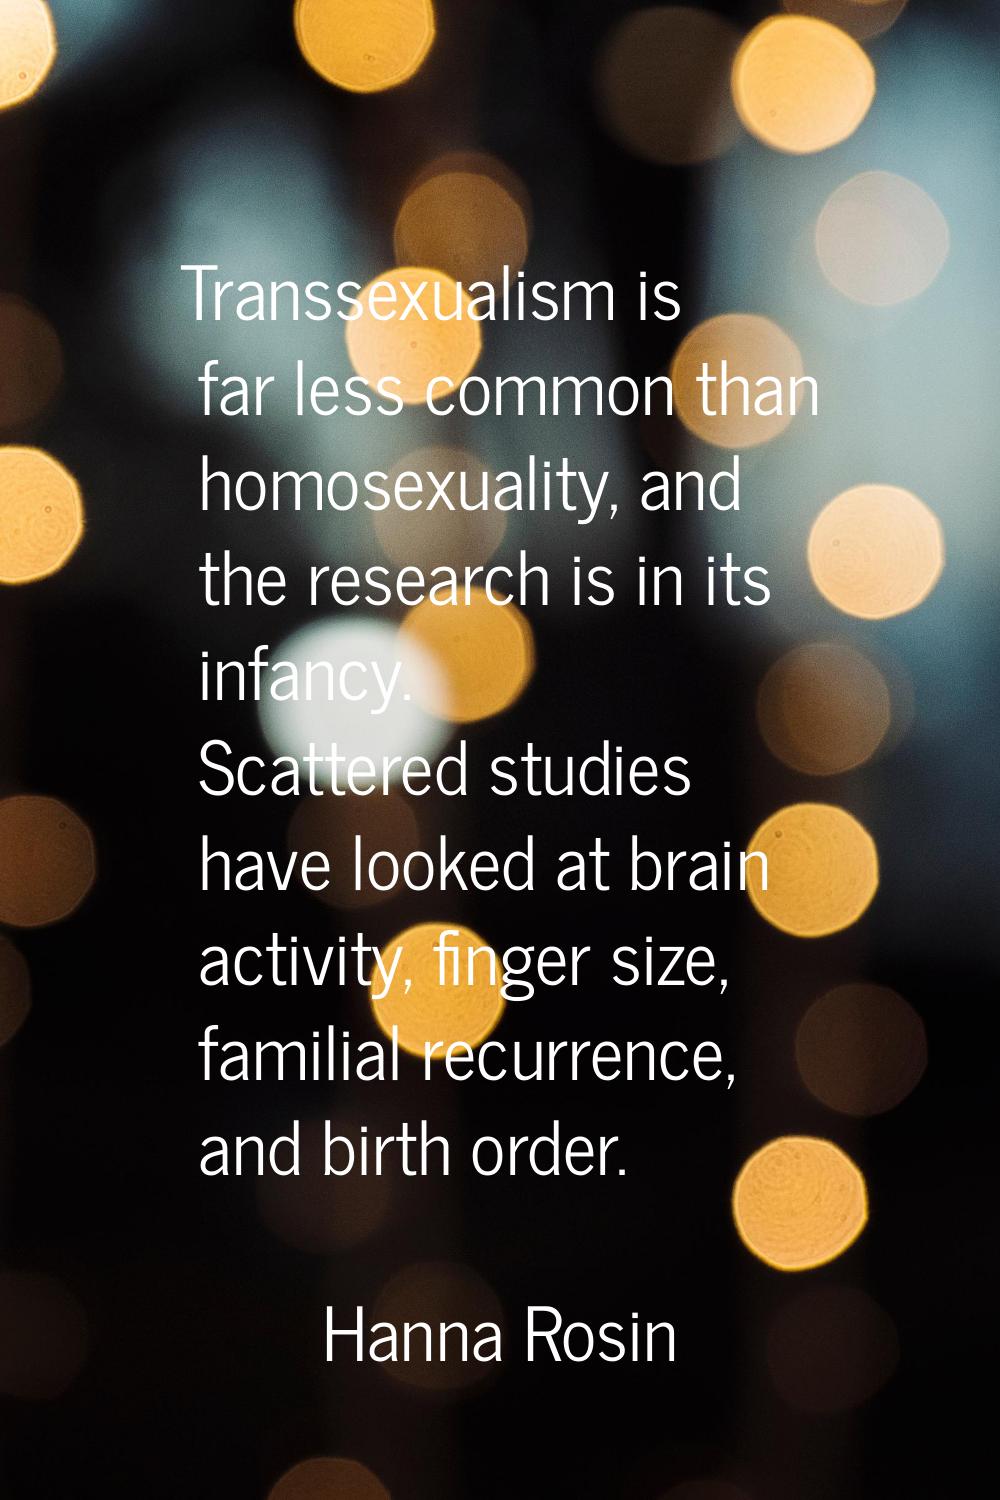 Transsexualism is far less common than homosexuality, and the research is in its infancy. Scattered